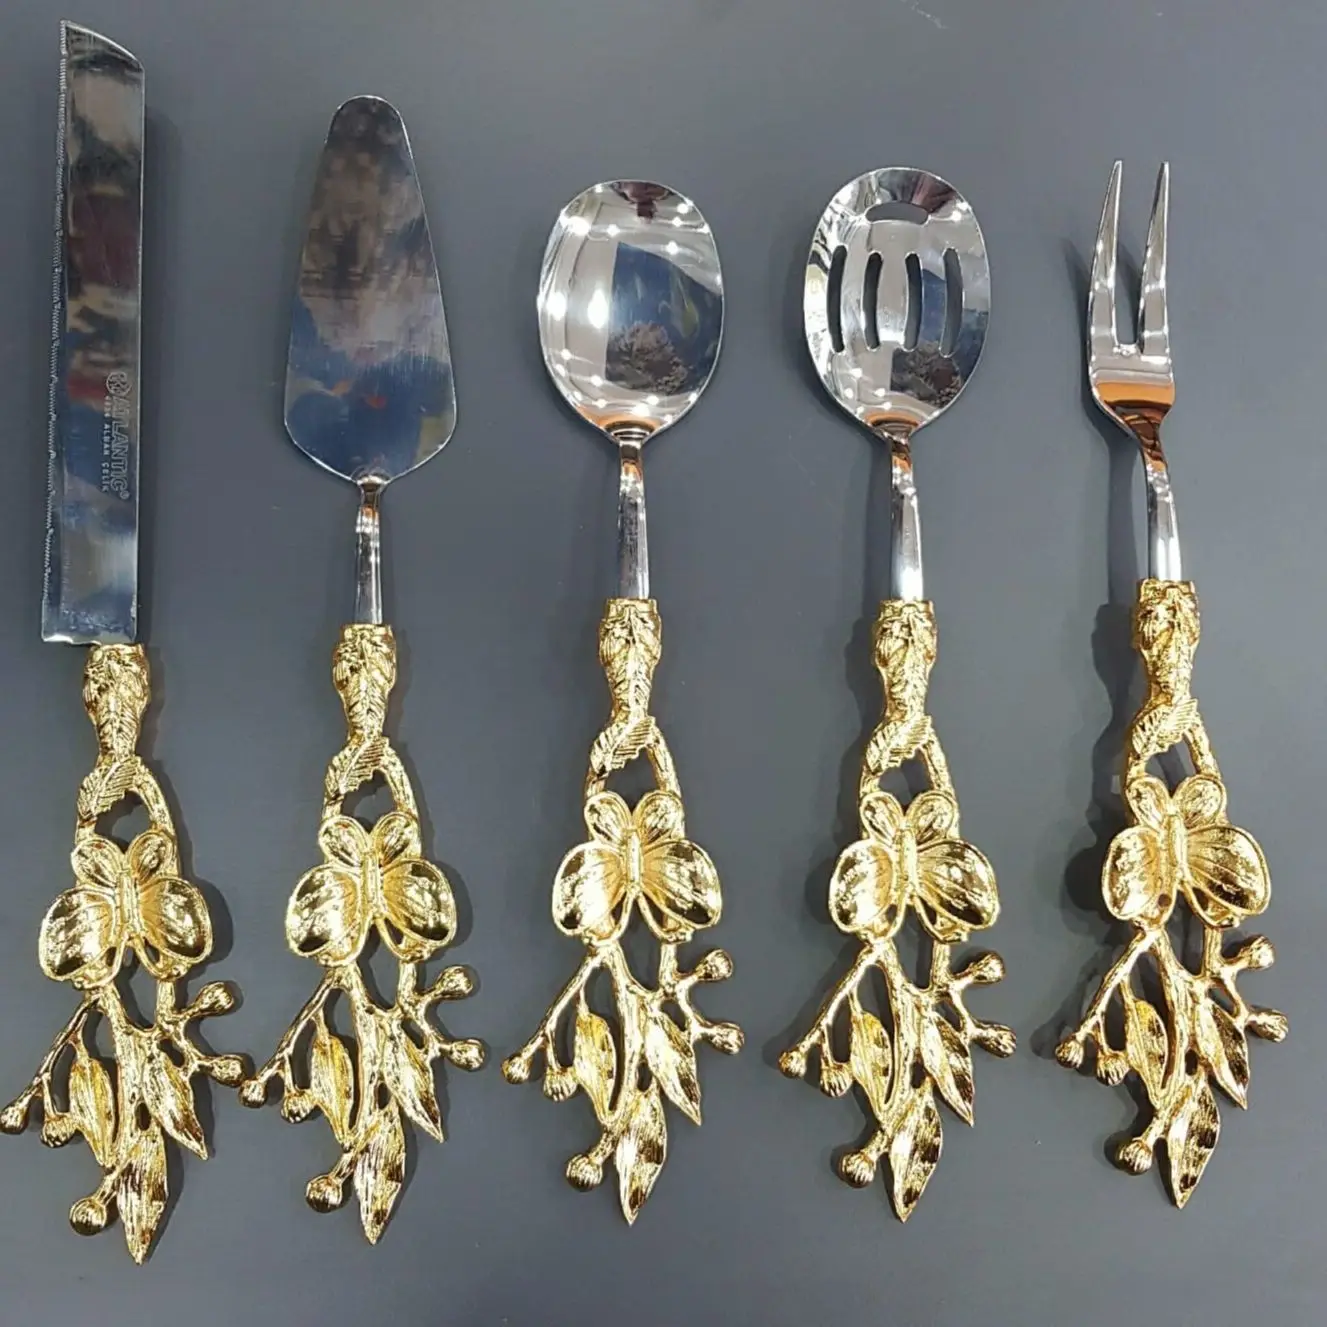 

5 Piece Butterfly Design Service Cutlery Gold Colour Food Presentation Tableware Kitchen Dinner Accessories Metal